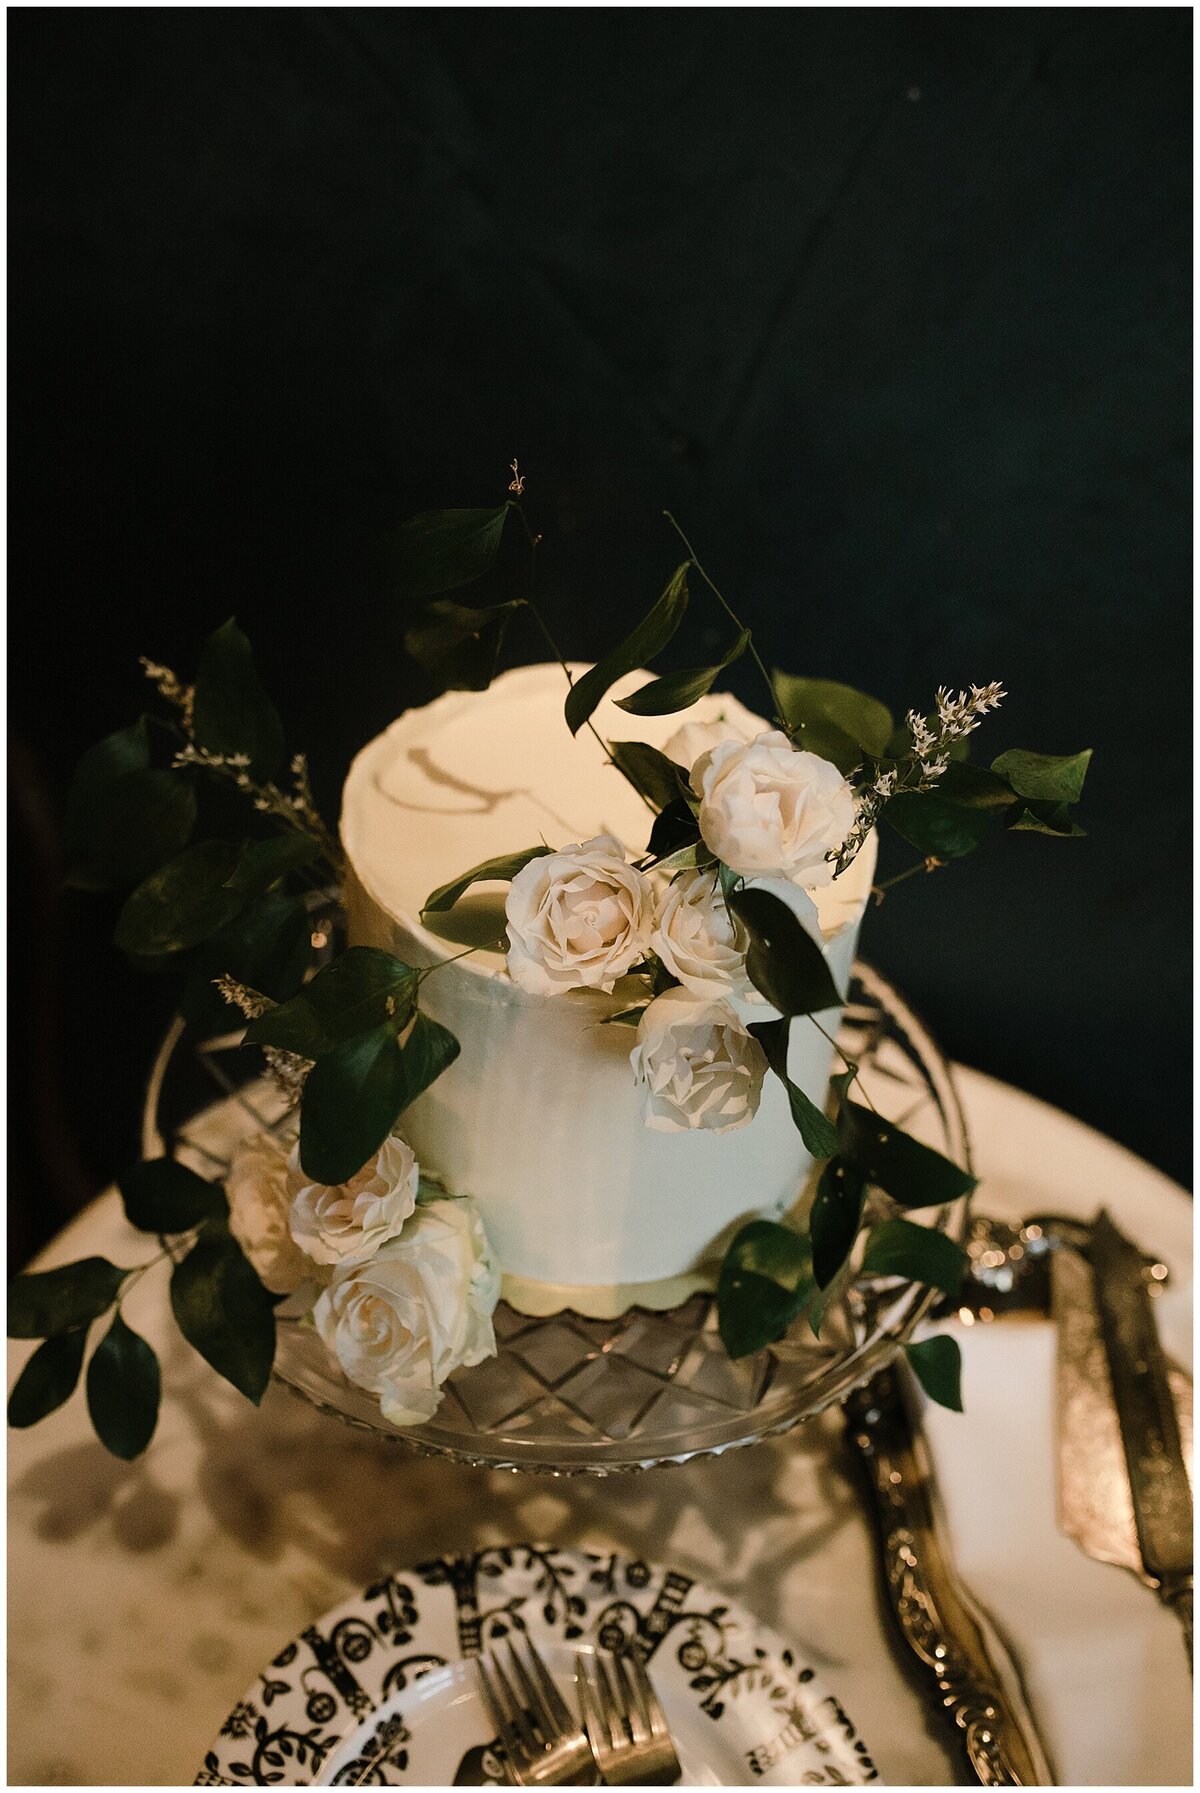 Wedding cake decorated with white florals for Hotel Saint Cecilia elopement wedding